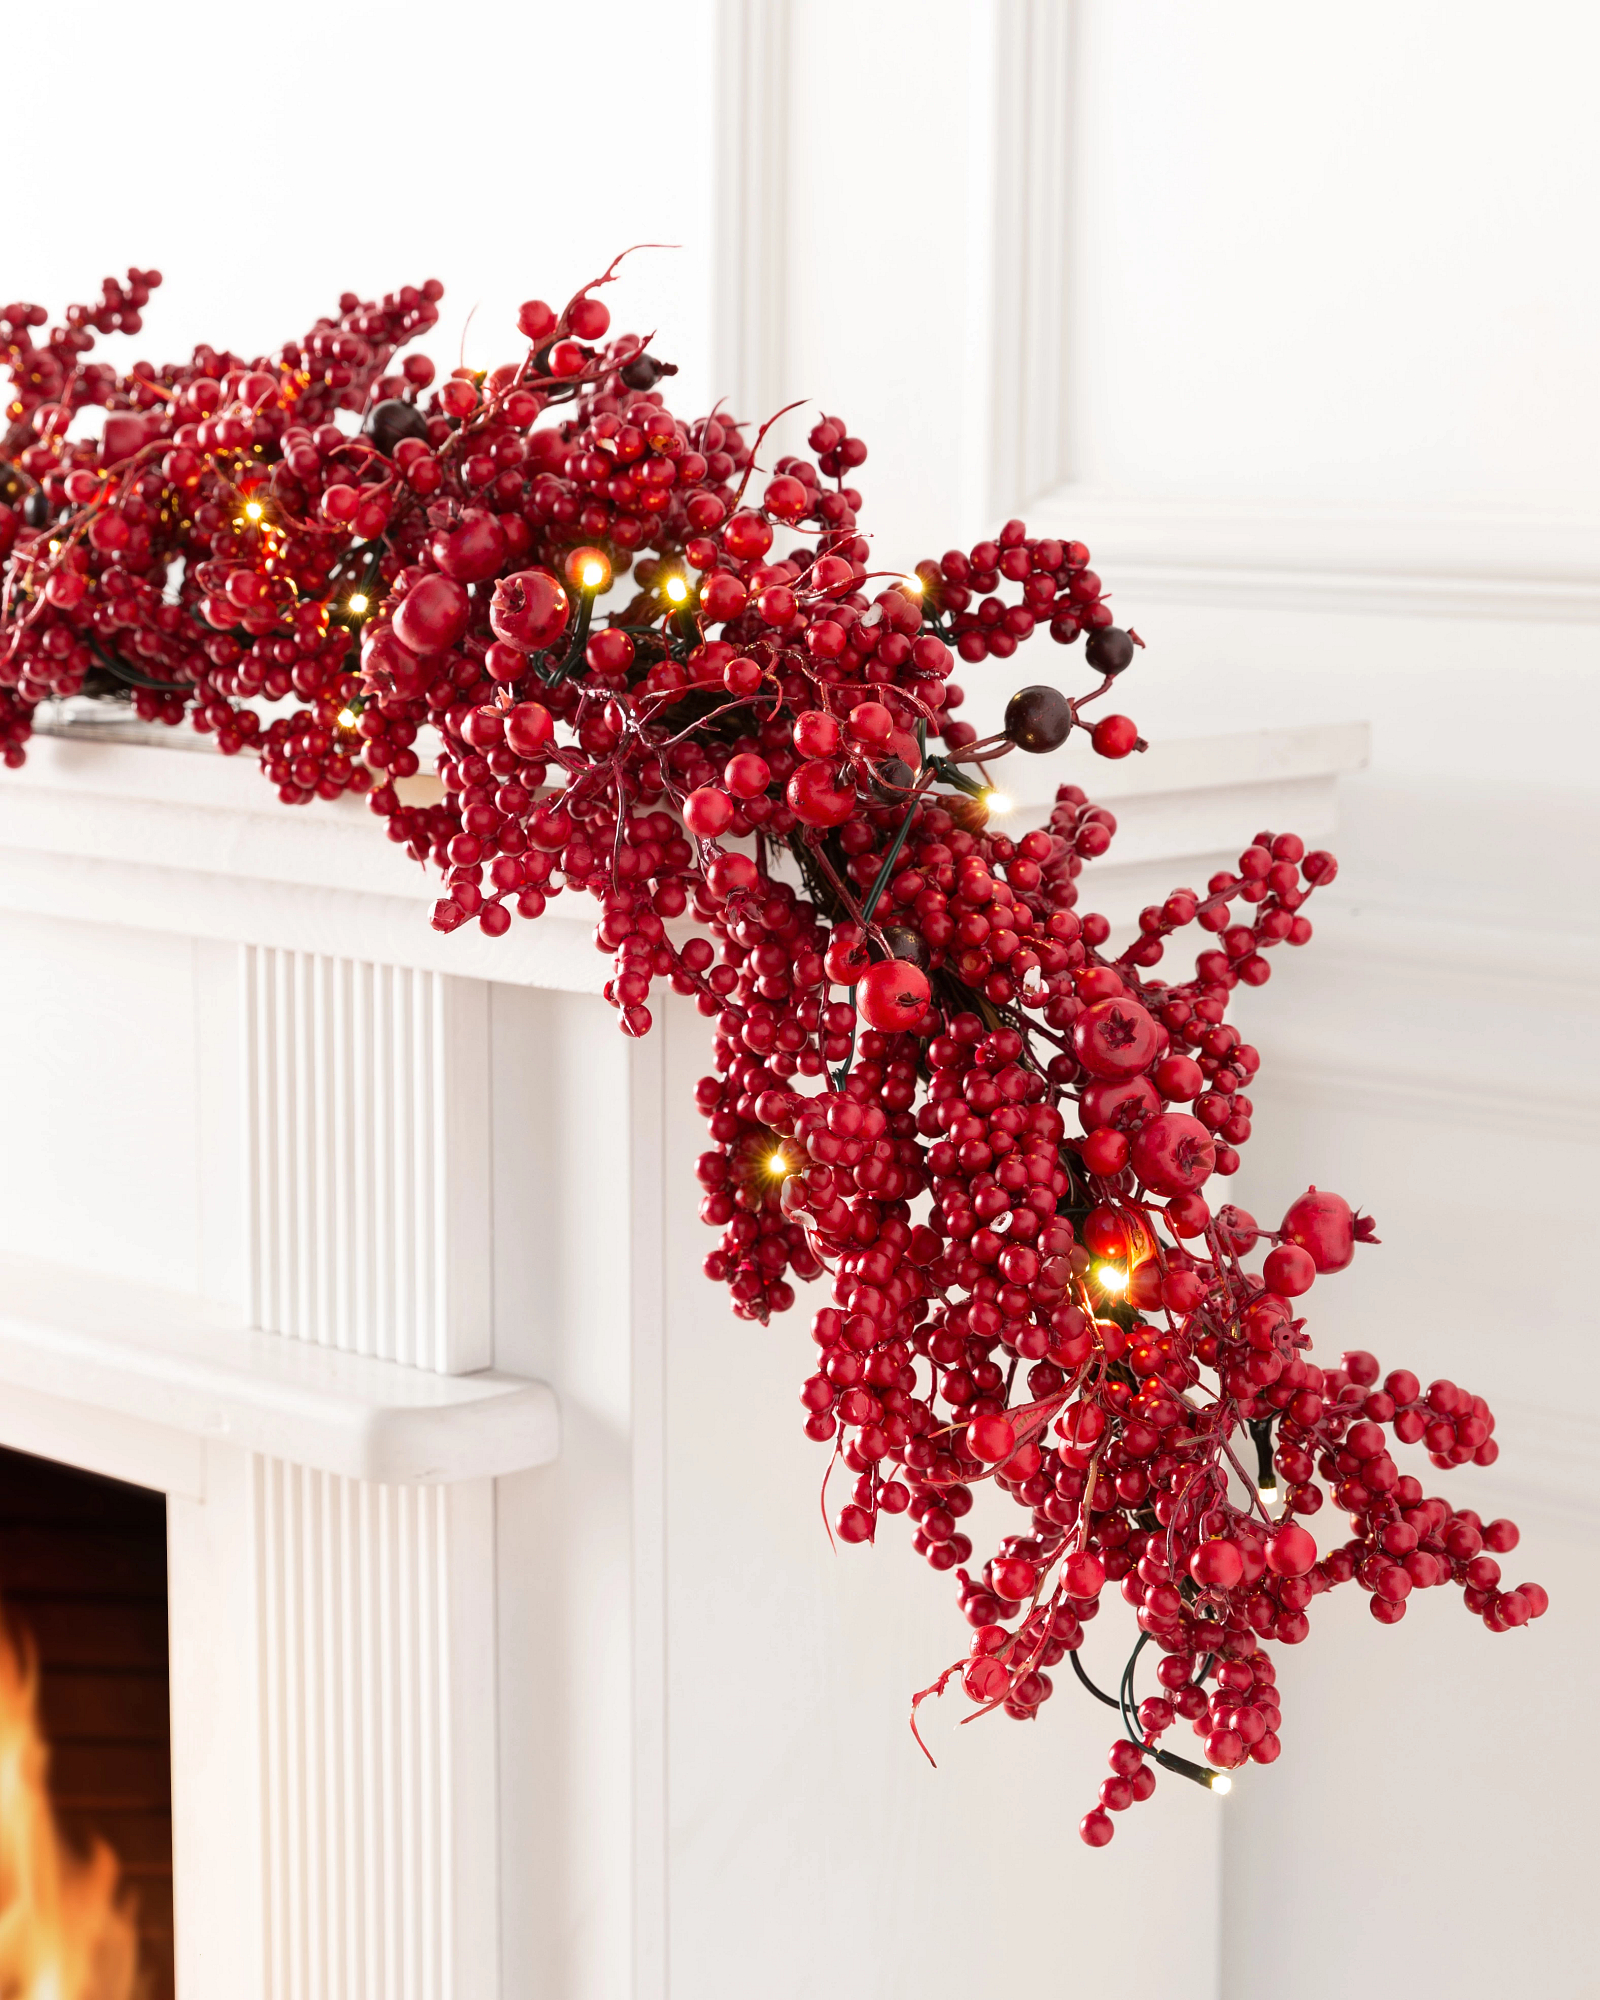 Festive Red Berry Foliage Holiday Wreath